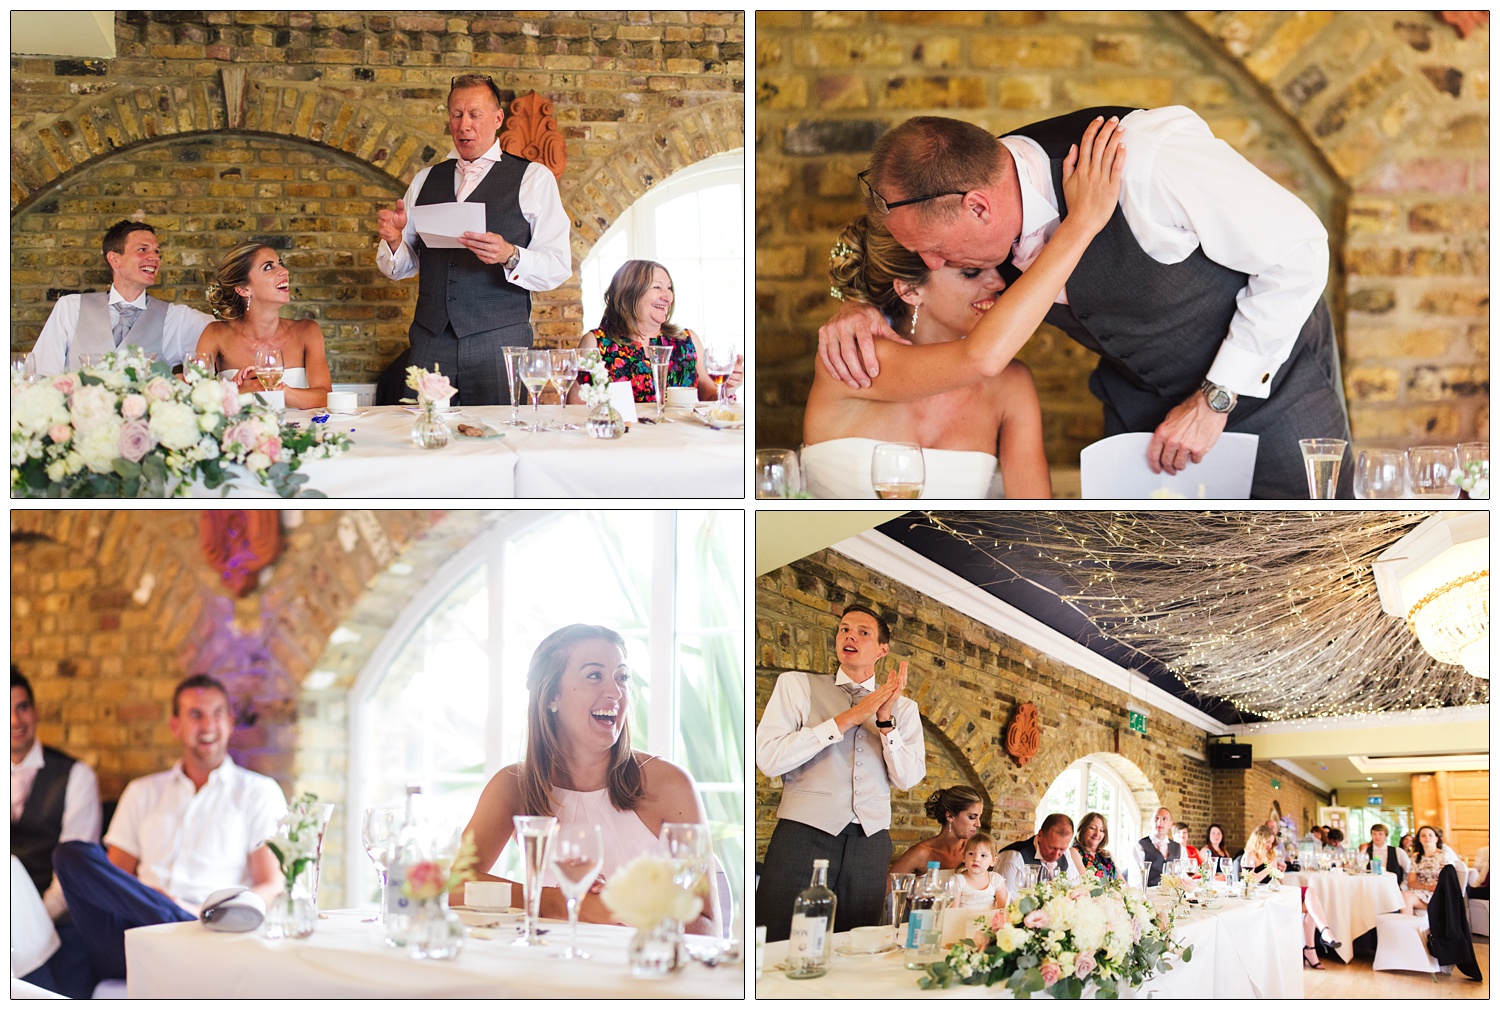 Moments from wedding speeches.